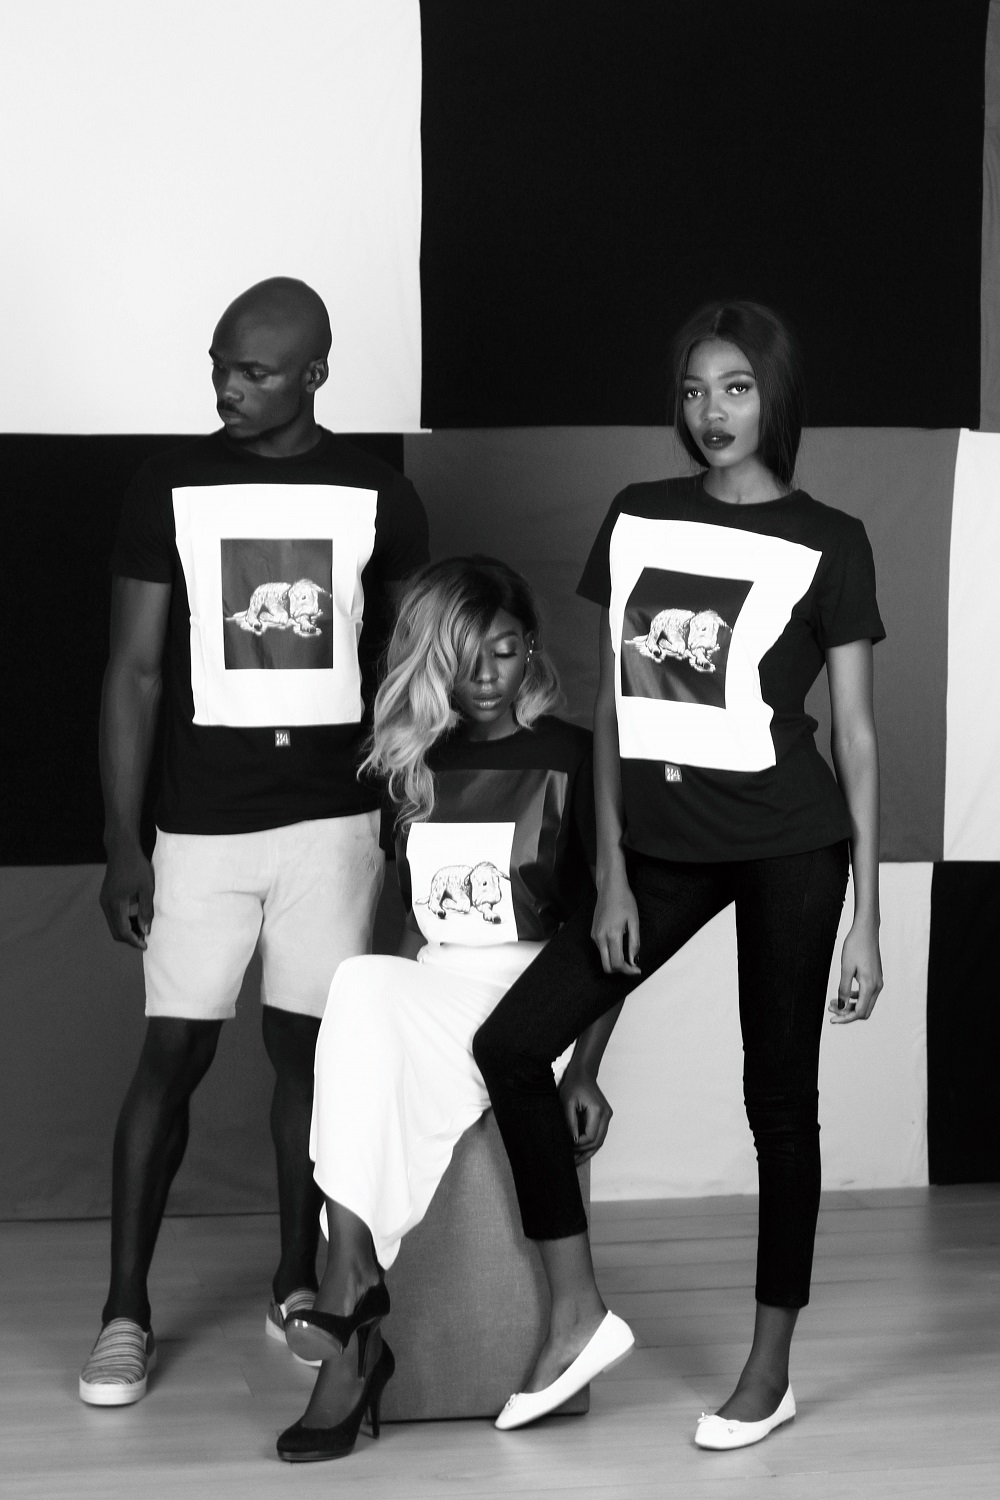 You Need to See 24 Apparel’s New Collection of T-shirts titled “Animal Kingdom”